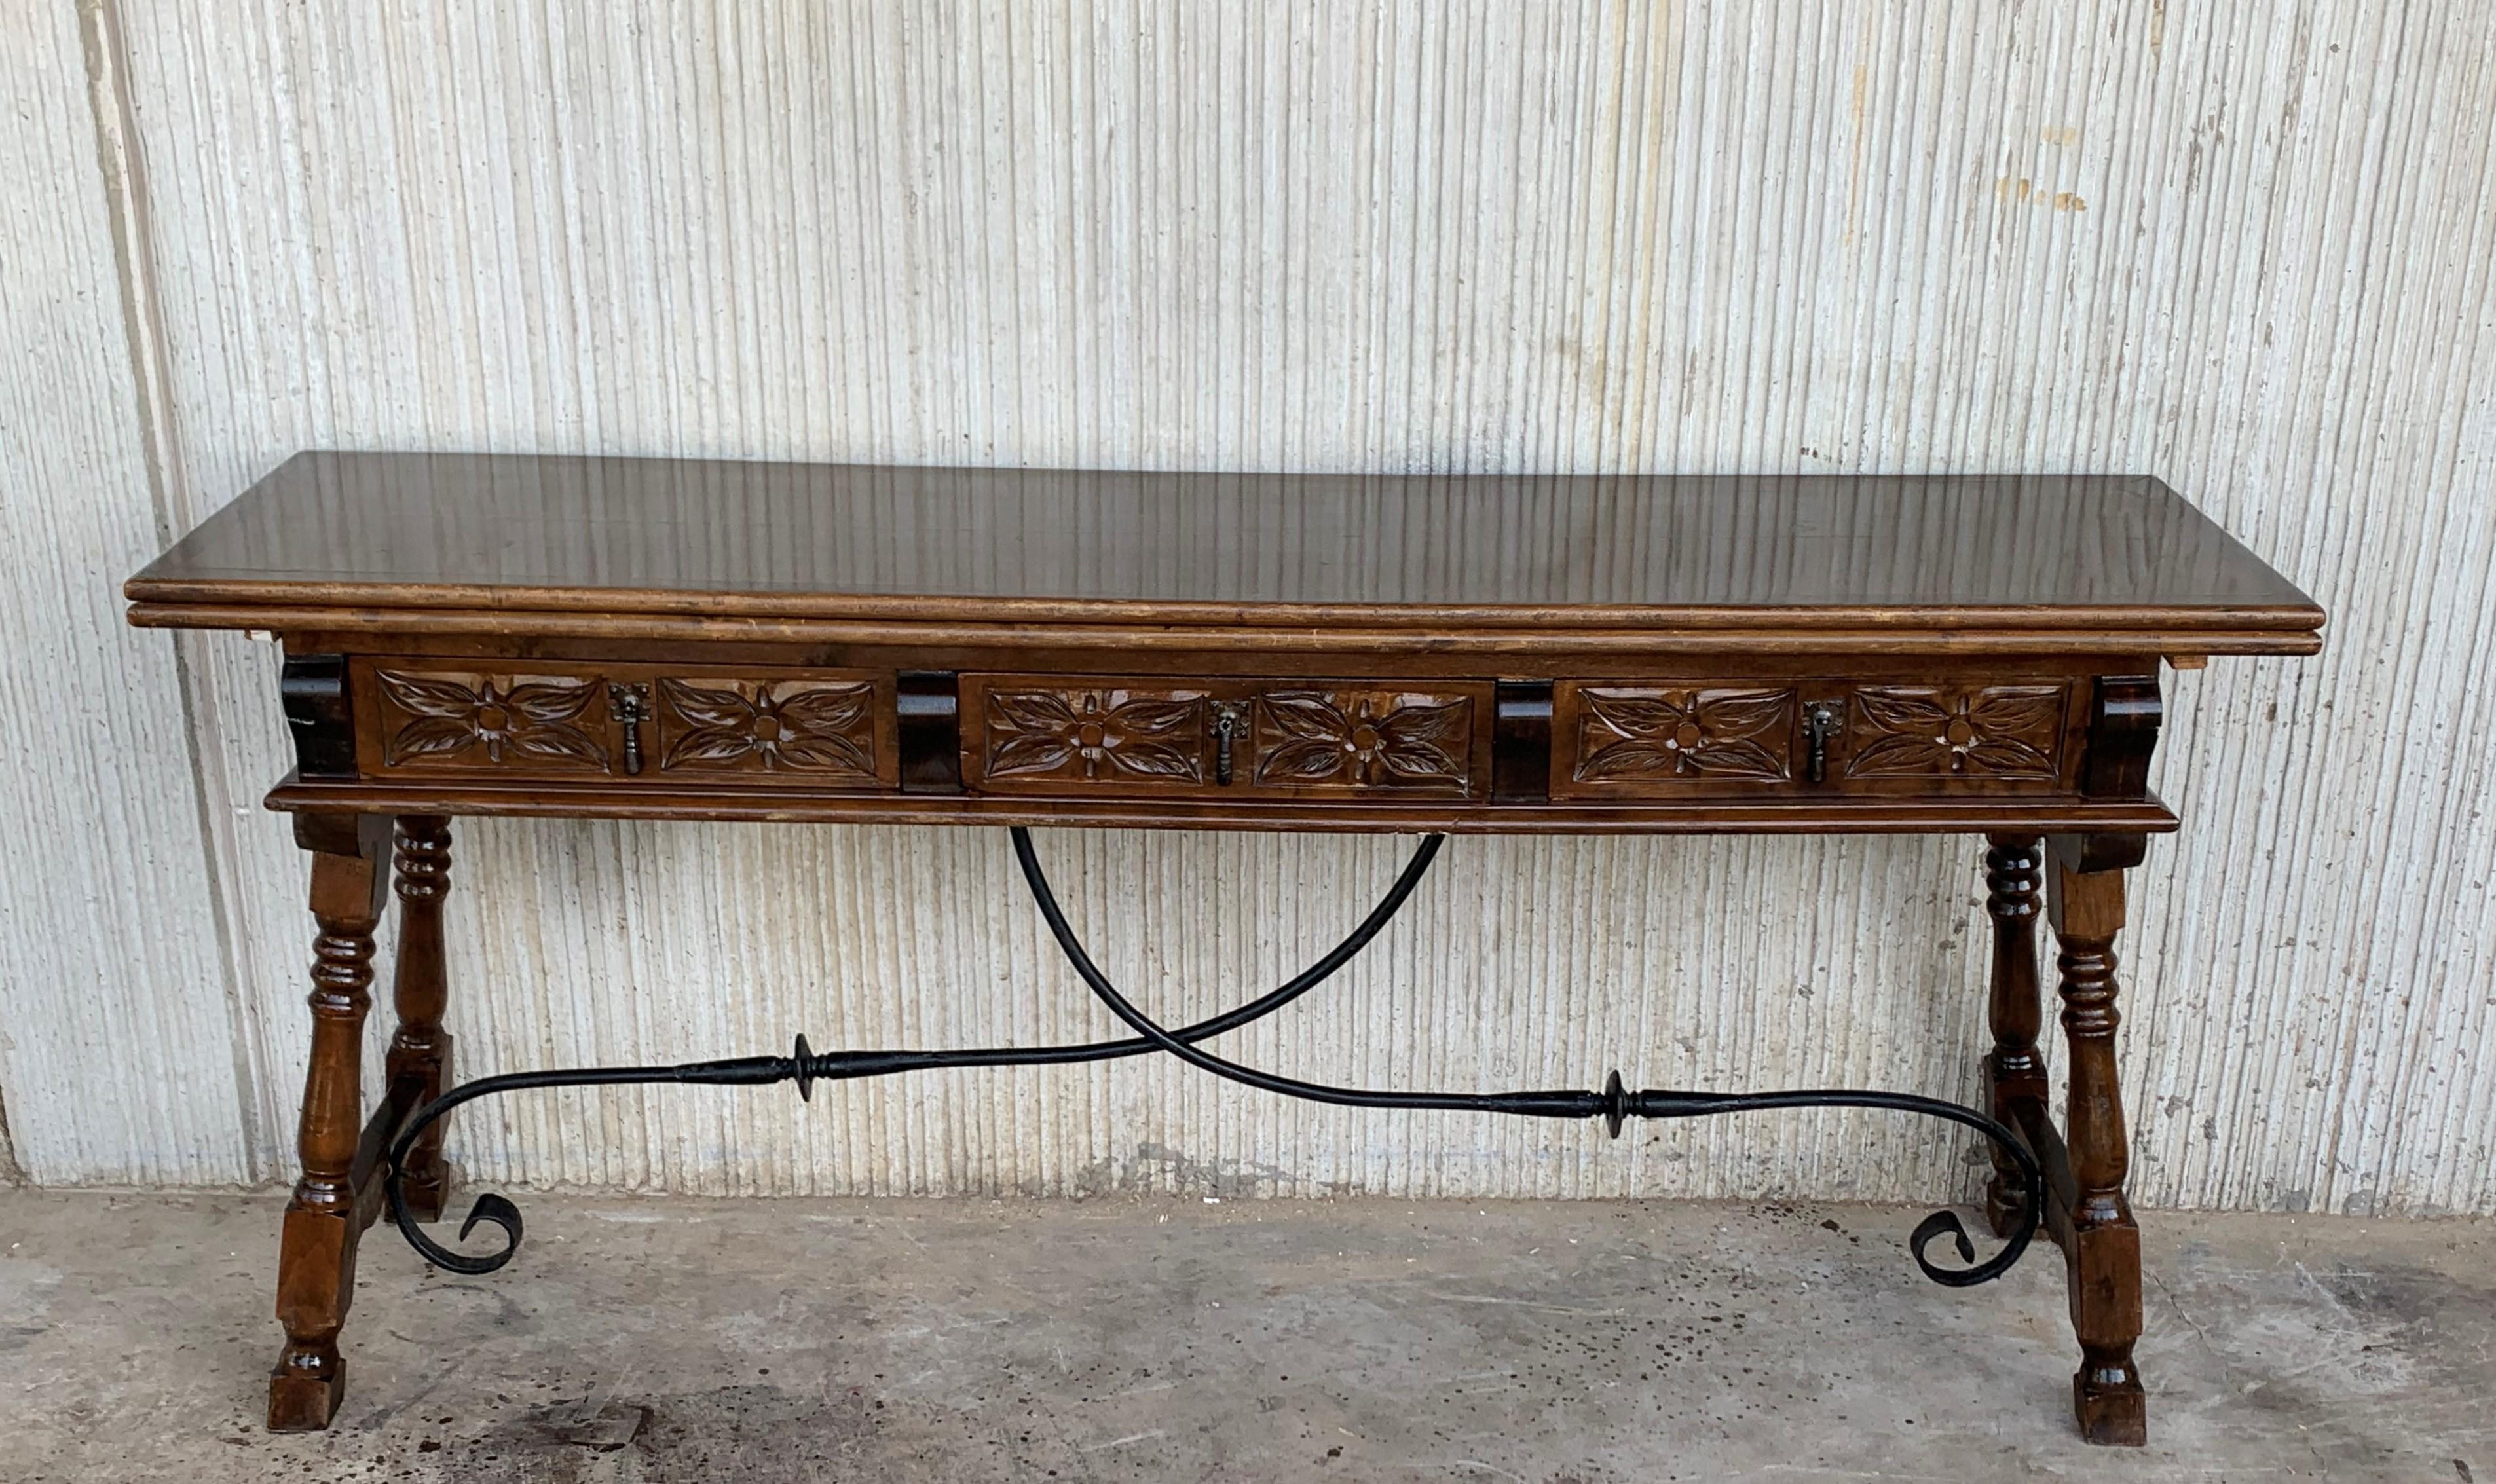 Spanish Colonial 20th Century Spanish Console Fold Out Table with Iron Stretcher & Three Drawers